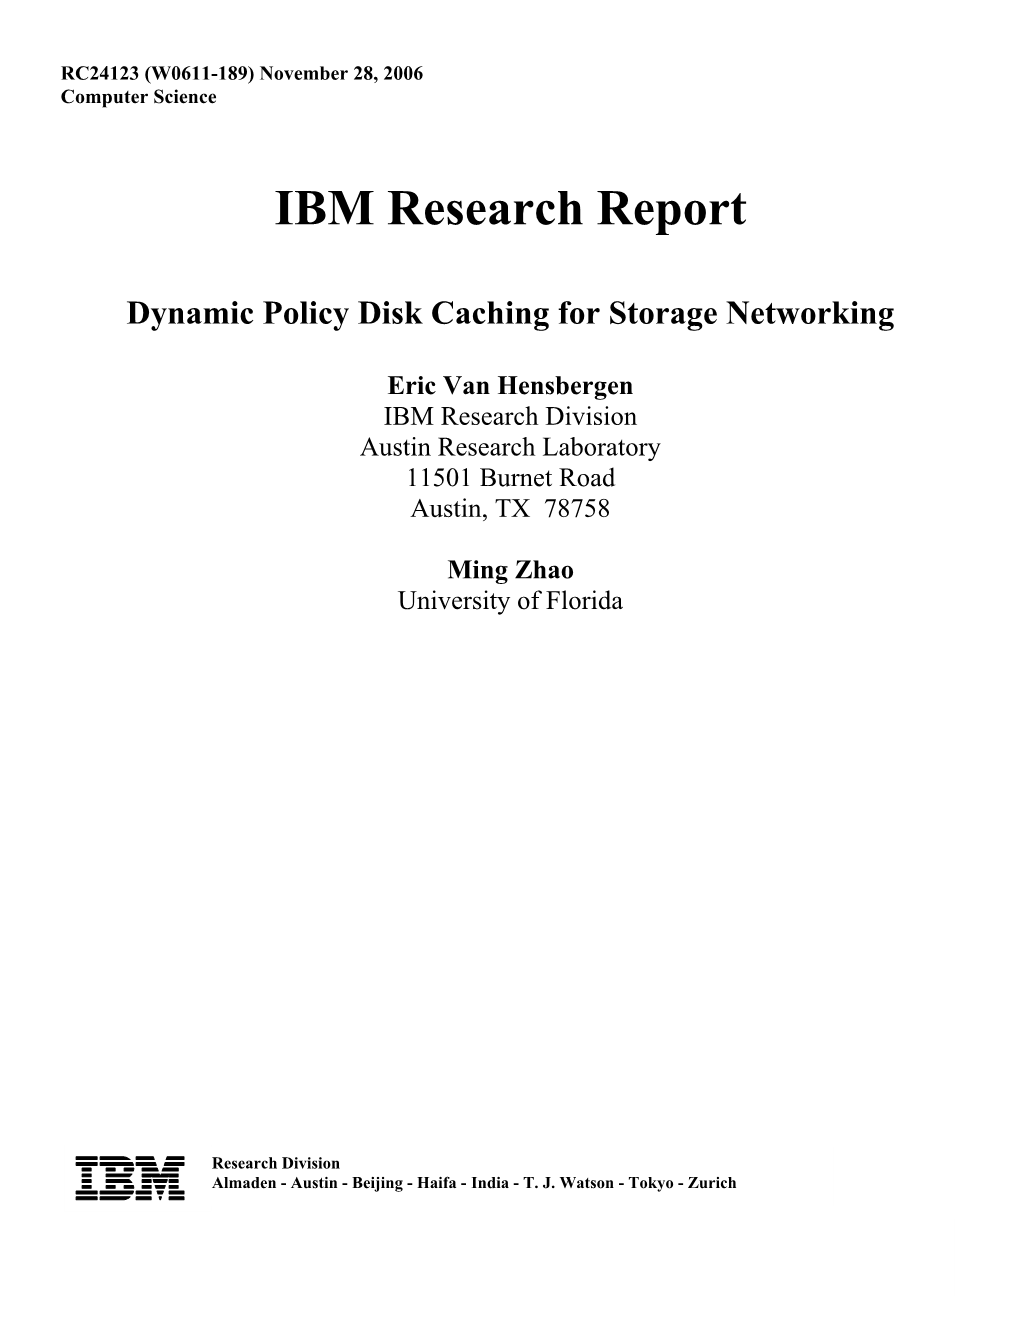 Dynamic Policy Disk Caching for Storage Networking